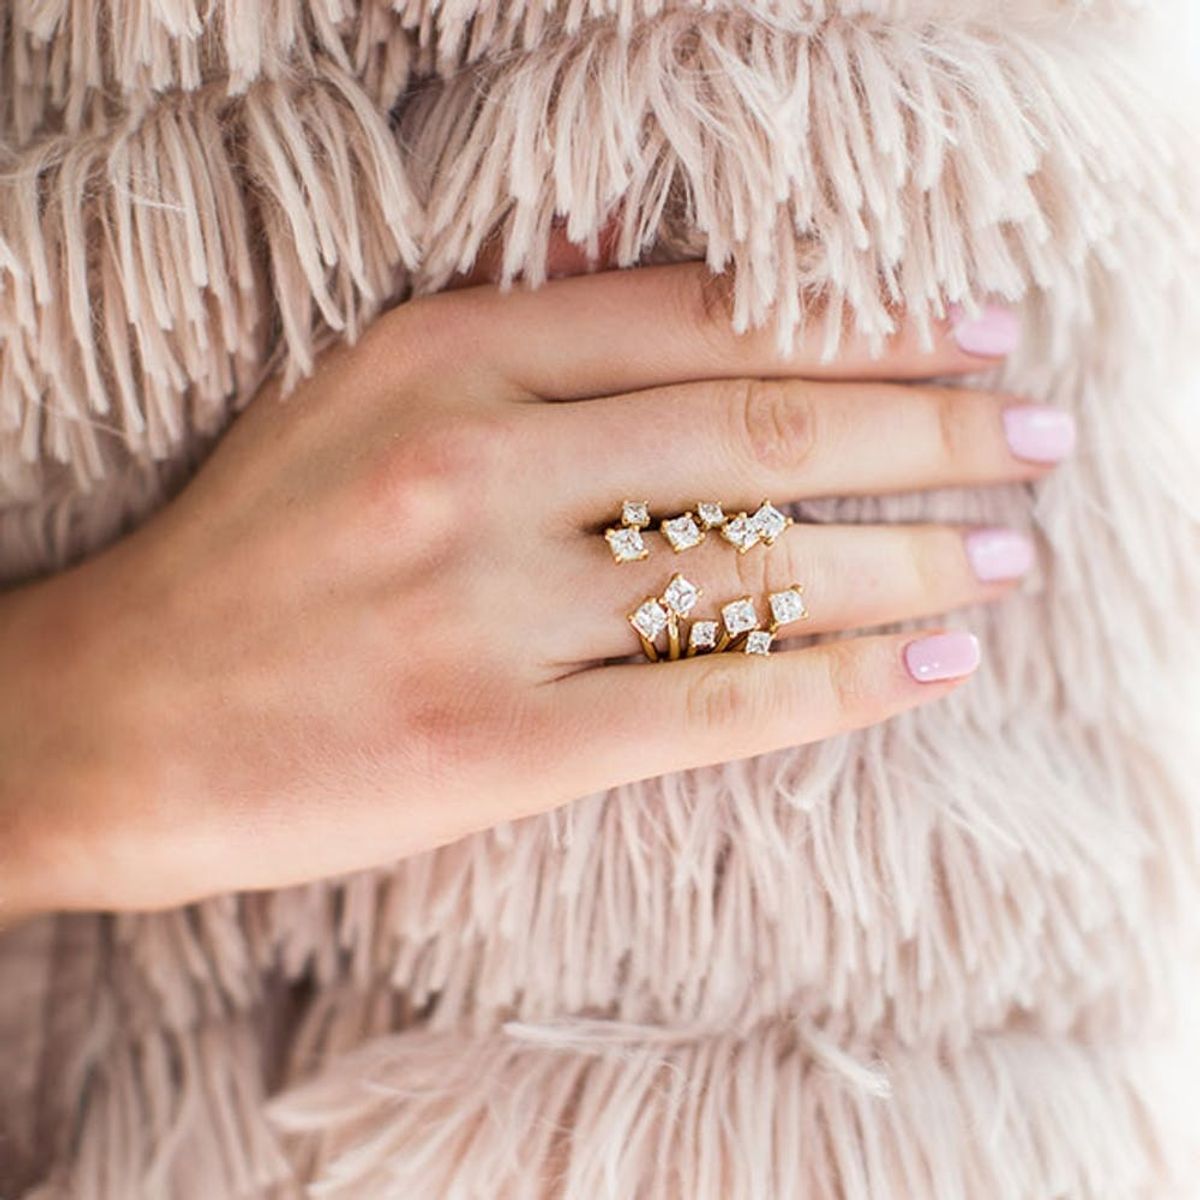 You’ll Want to Wear This Blogger’s Jewelry to All Your Spring Weddings